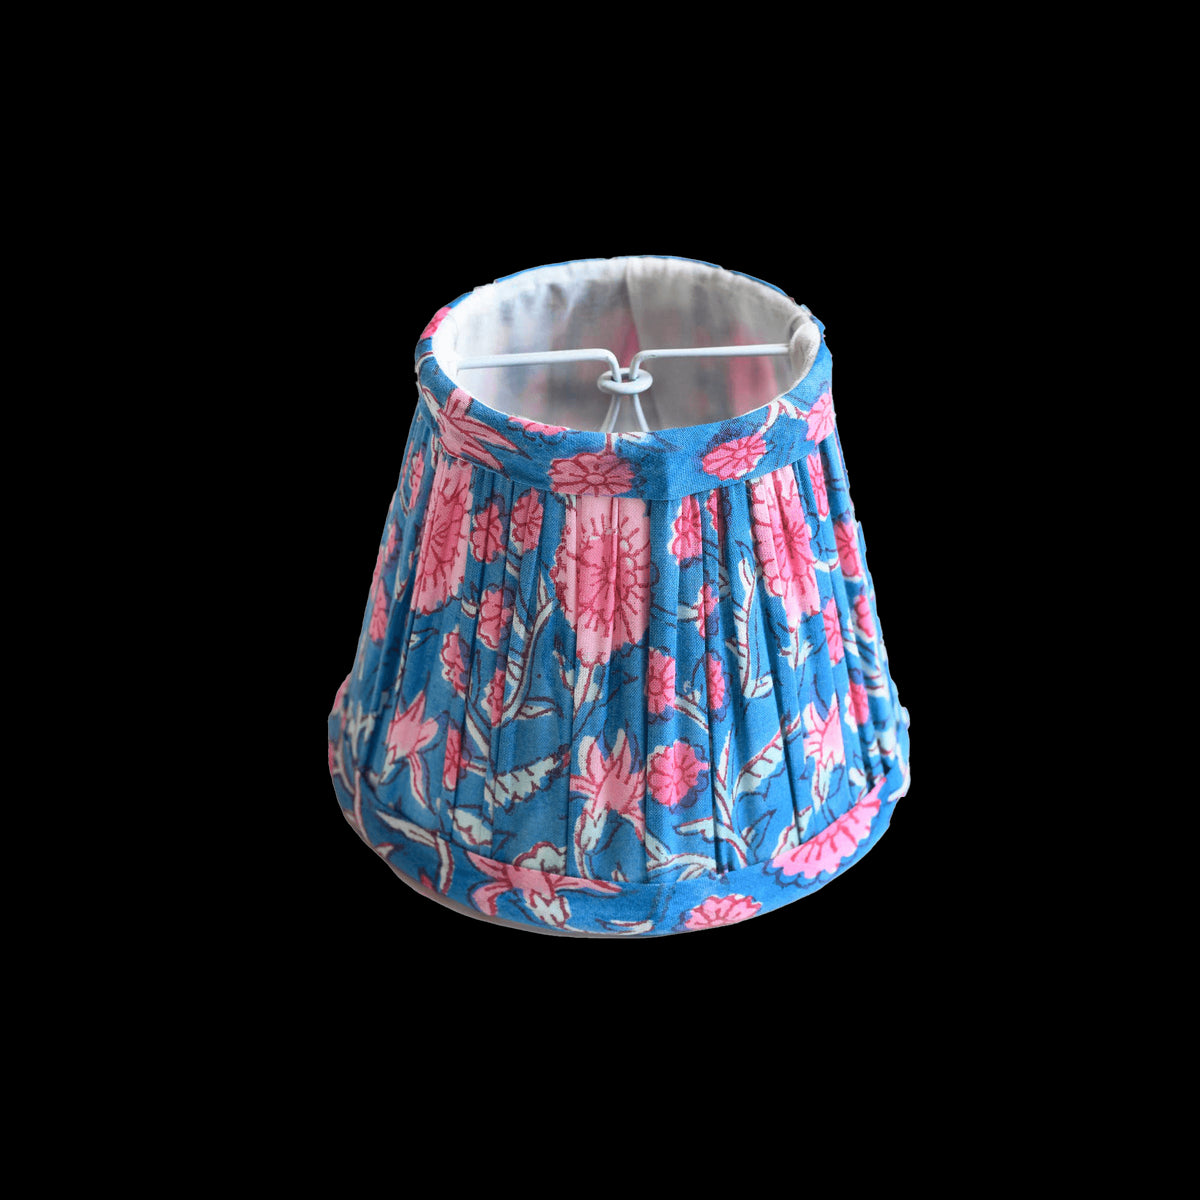 Hand block printed organic cotton pleated chandelier lampshade in blue and pink.